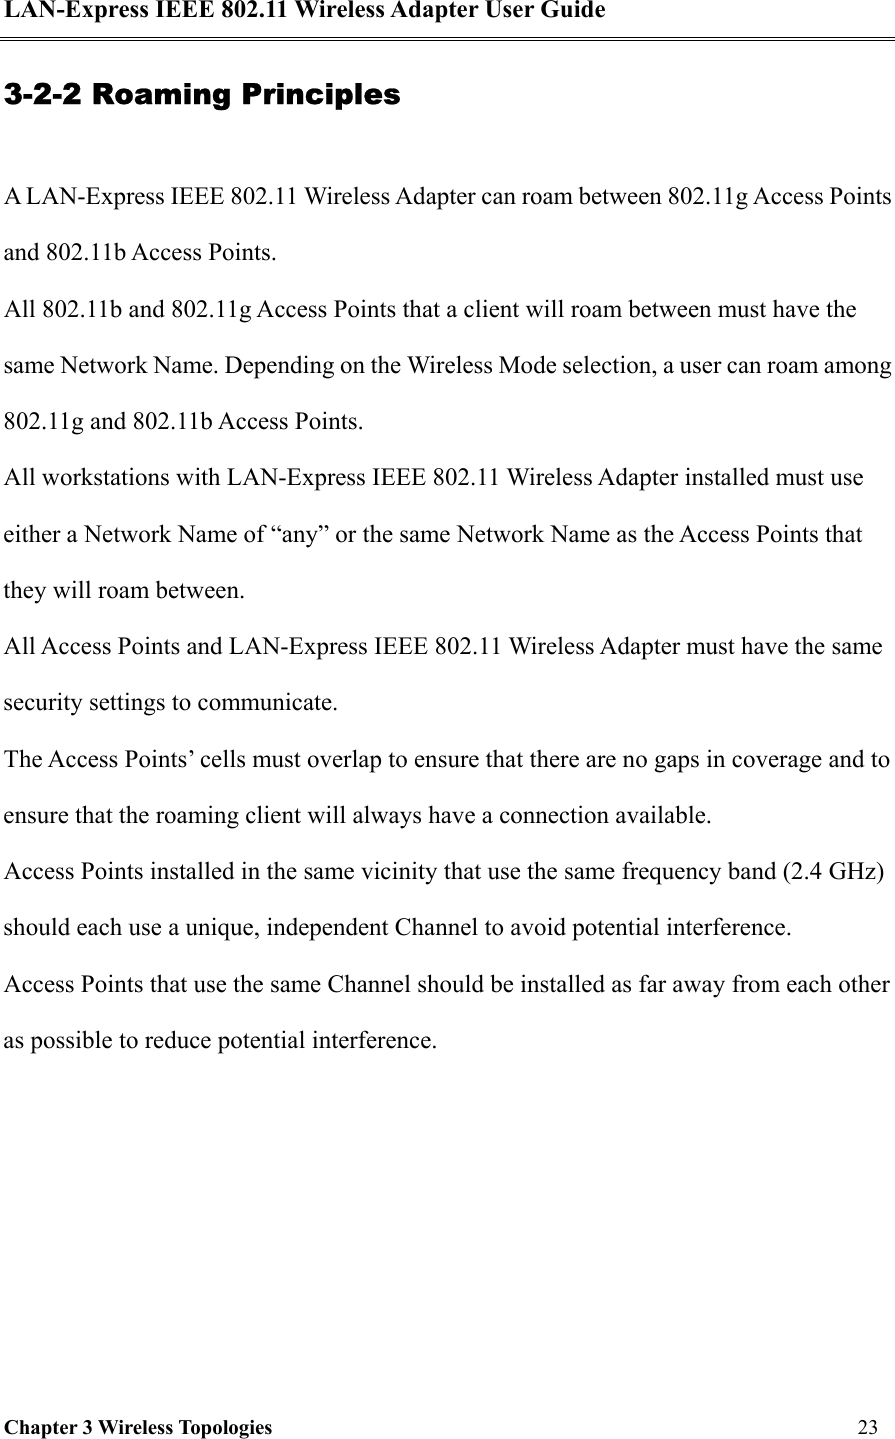 LAN-Express IEEE 802.11 Wireless Adapter User Guide Chapter 3 Wireless Topologies   23  3-2-2 Roaming Principles  A LAN-Express IEEE 802.11 Wireless Adapter can roam between 802.11g Access Points and 802.11b Access Points. All 802.11b and 802.11g Access Points that a client will roam between must have the same Network Name. Depending on the Wireless Mode selection, a user can roam among 802.11g and 802.11b Access Points.  All workstations with LAN-Express IEEE 802.11 Wireless Adapter installed must use either a Network Name of “any” or the same Network Name as the Access Points that they will roam between. All Access Points and LAN-Express IEEE 802.11 Wireless Adapter must have the same security settings to communicate. The Access Points’ cells must overlap to ensure that there are no gaps in coverage and to ensure that the roaming client will always have a connection available. Access Points installed in the same vicinity that use the same frequency band (2.4 GHz) should each use a unique, independent Channel to avoid potential interference. Access Points that use the same Channel should be installed as far away from each other as possible to reduce potential interference.